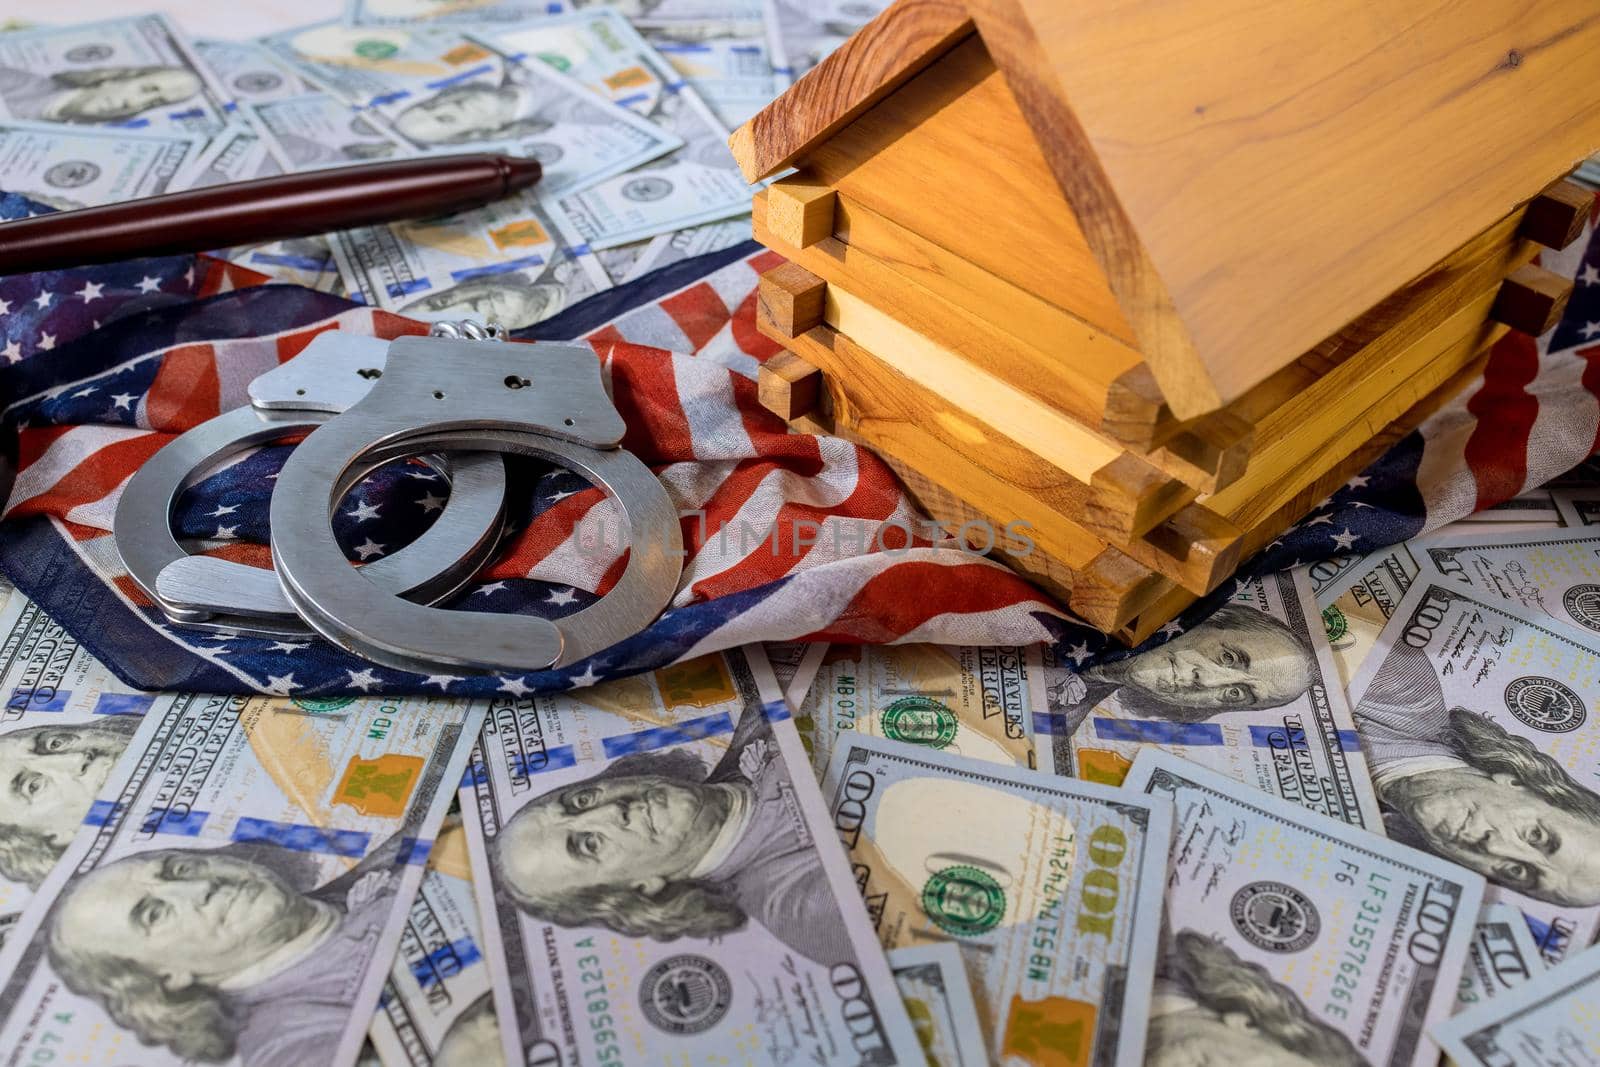 American court imposed an arrest to on house of the sanctions property with US dollars banknotes by ungvar